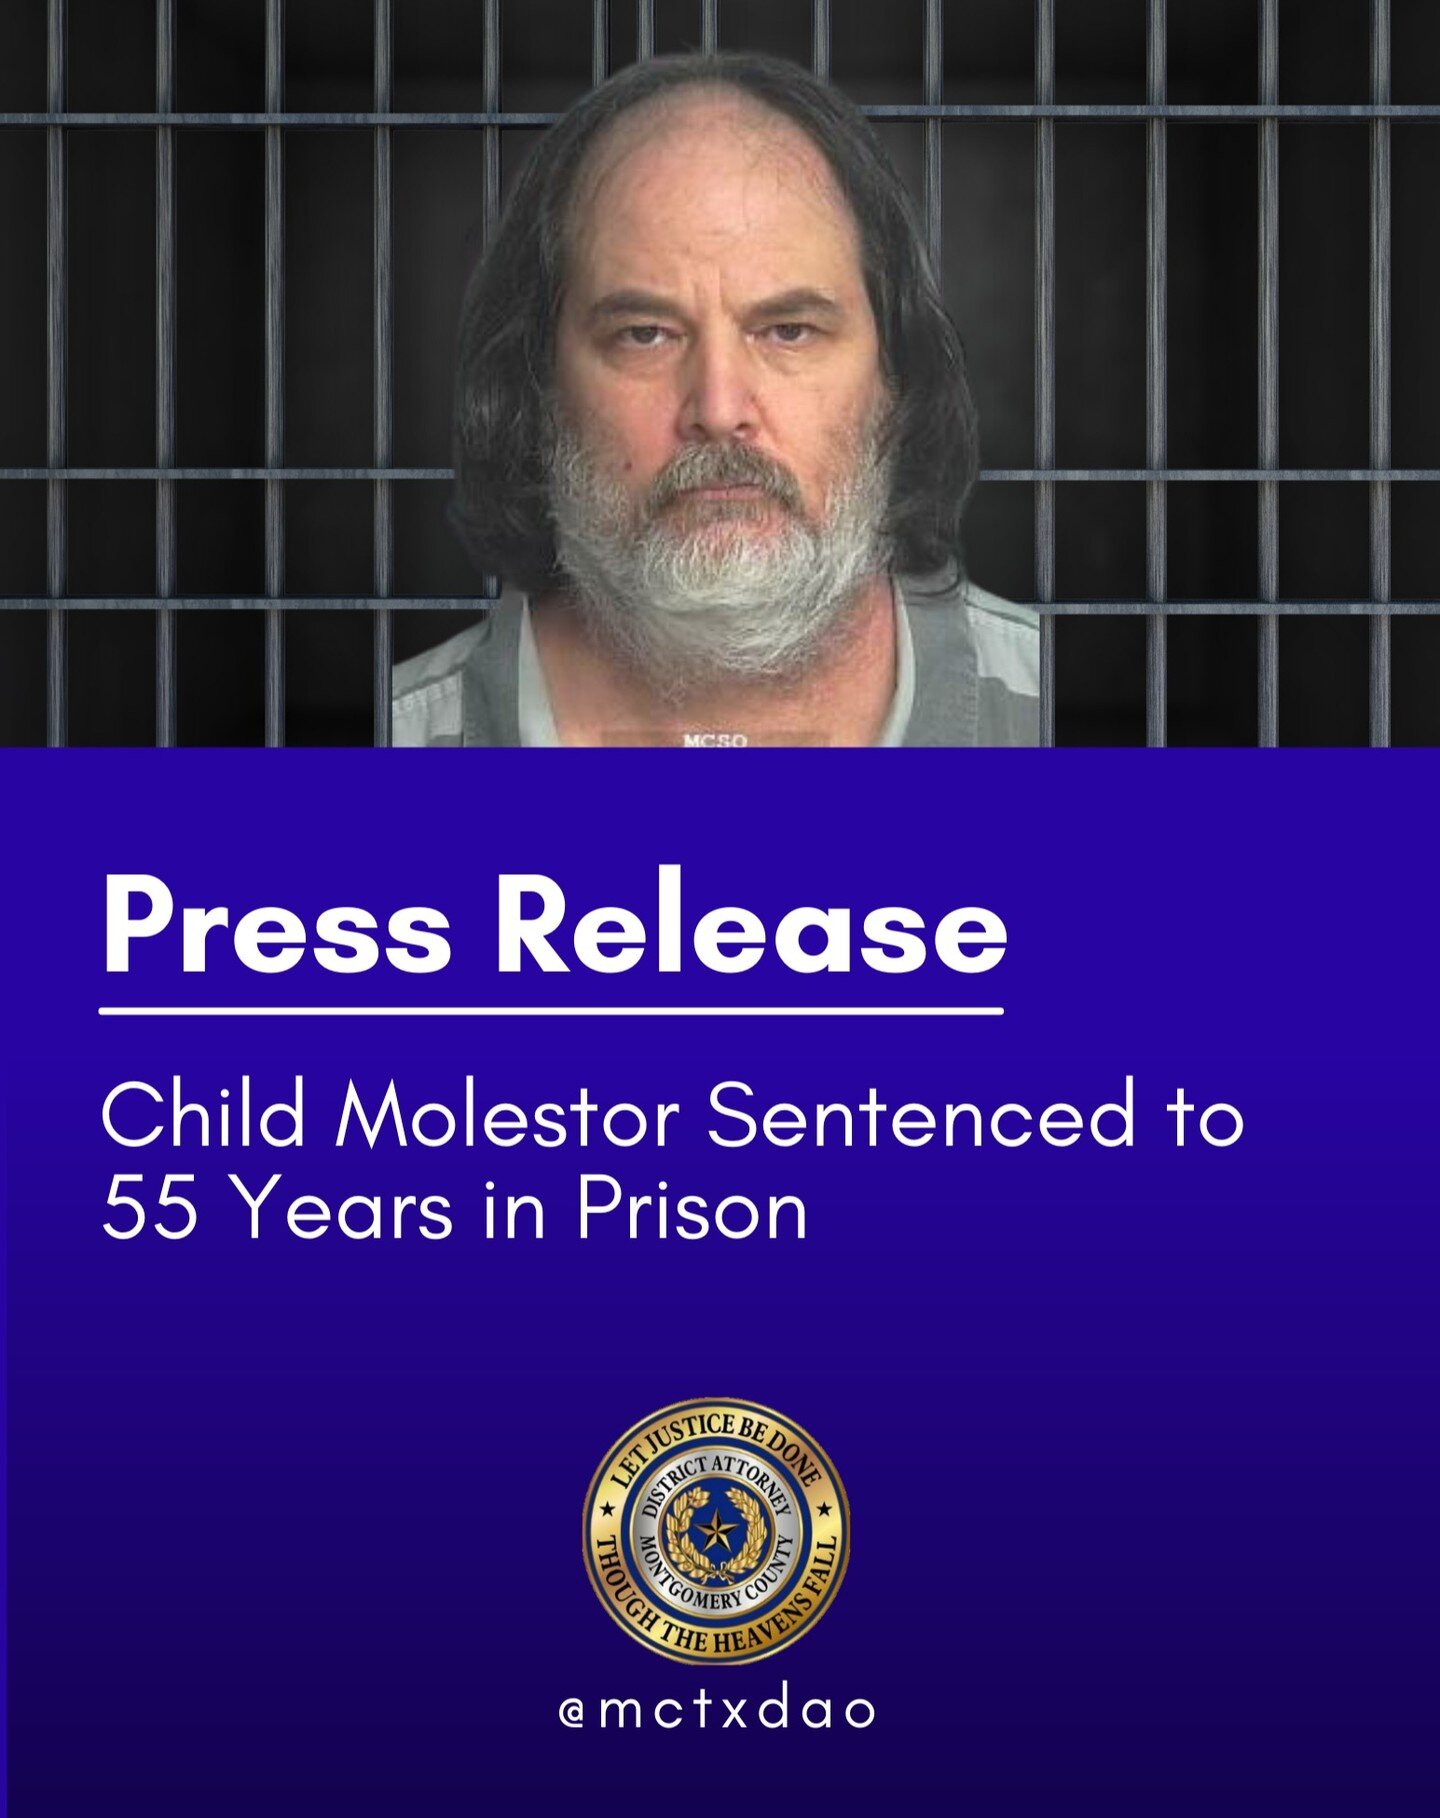 Child Molestor Sentenced to 55 Years in Prison

For press releases, please visit the link in our bio.